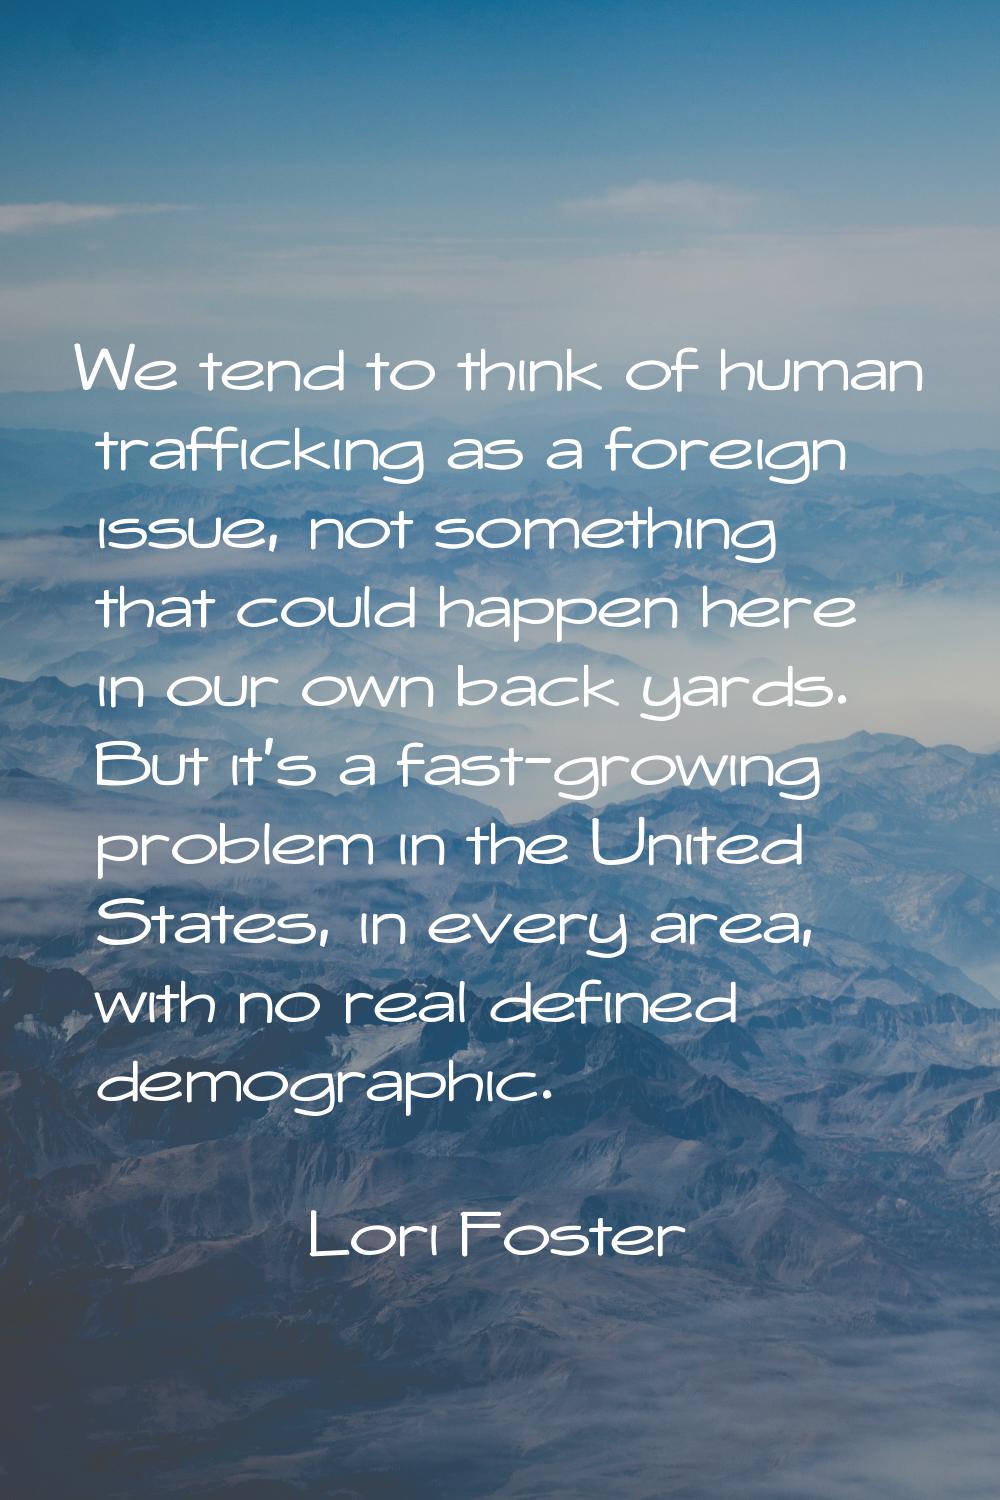 We tend to think of human trafficking as a foreign issue, not something that could happen here in o